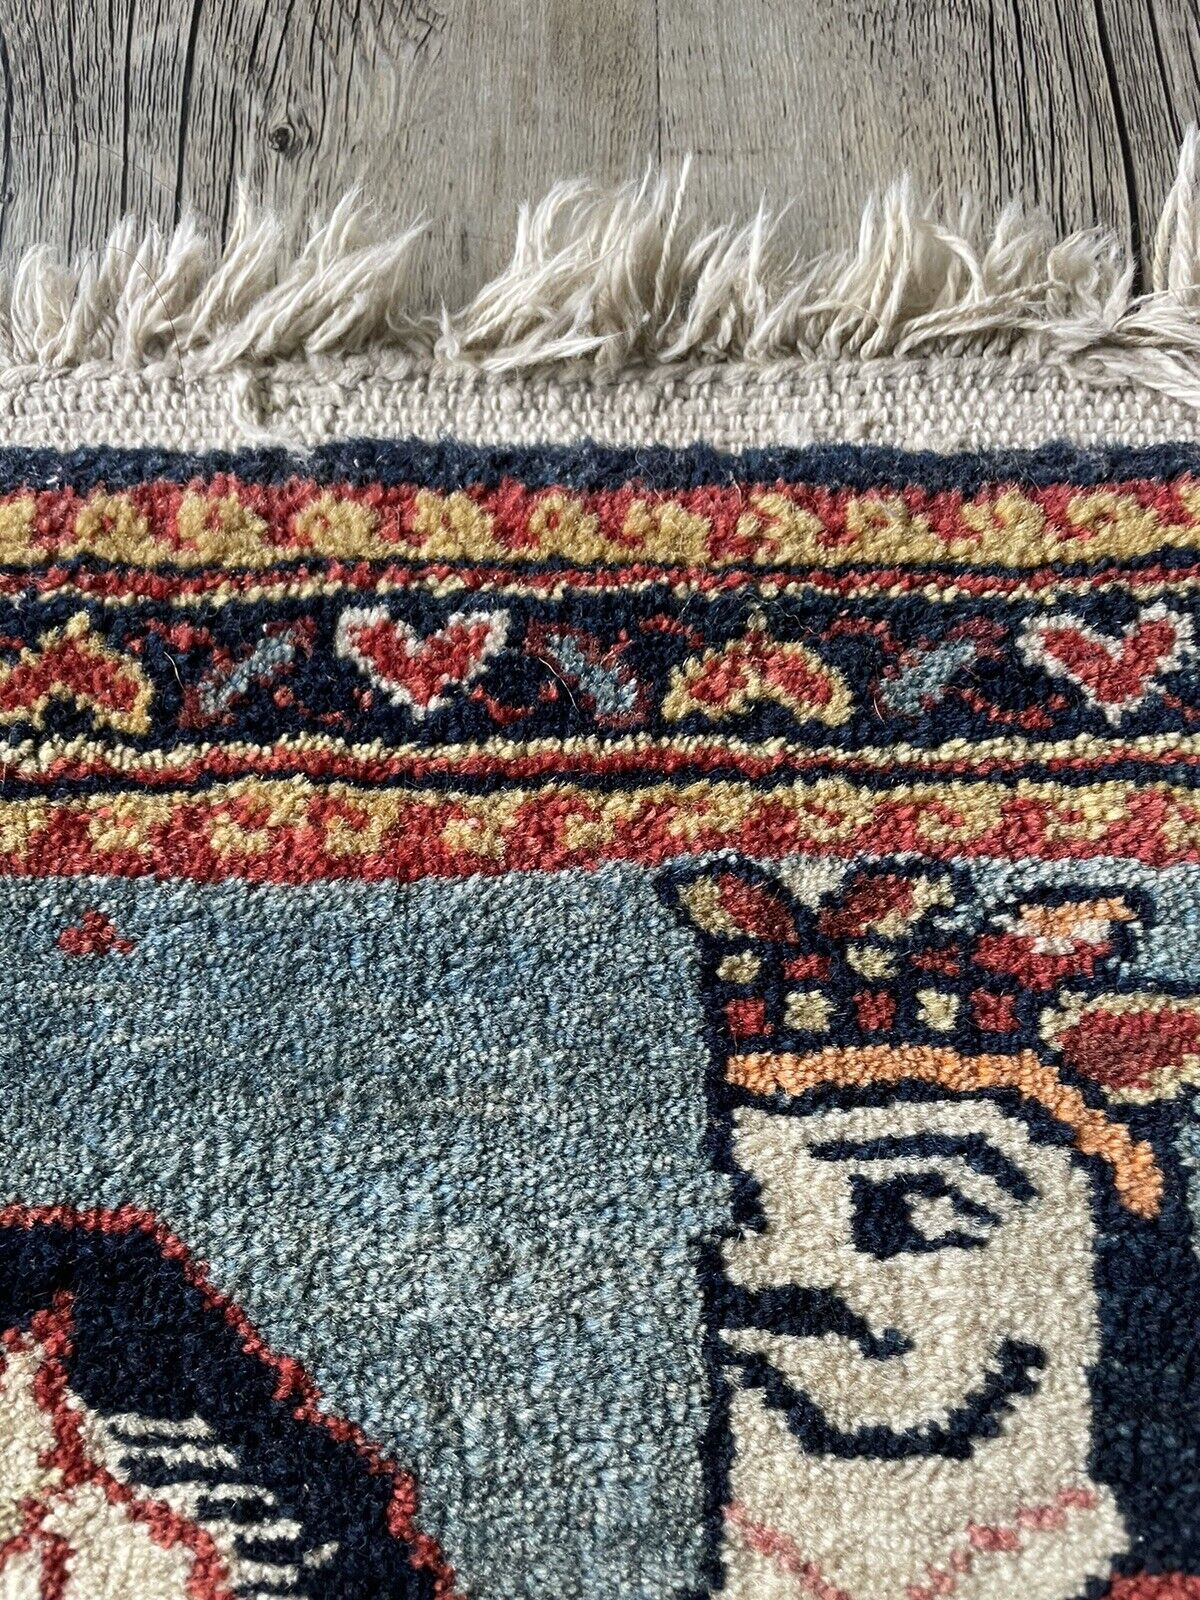 Close-up of remarkable design on Handmade Antique Persian Lilihan Collectible Rug - Detailed view showcasing the remarkable design featuring a lady and horseman that sets this rug apart.